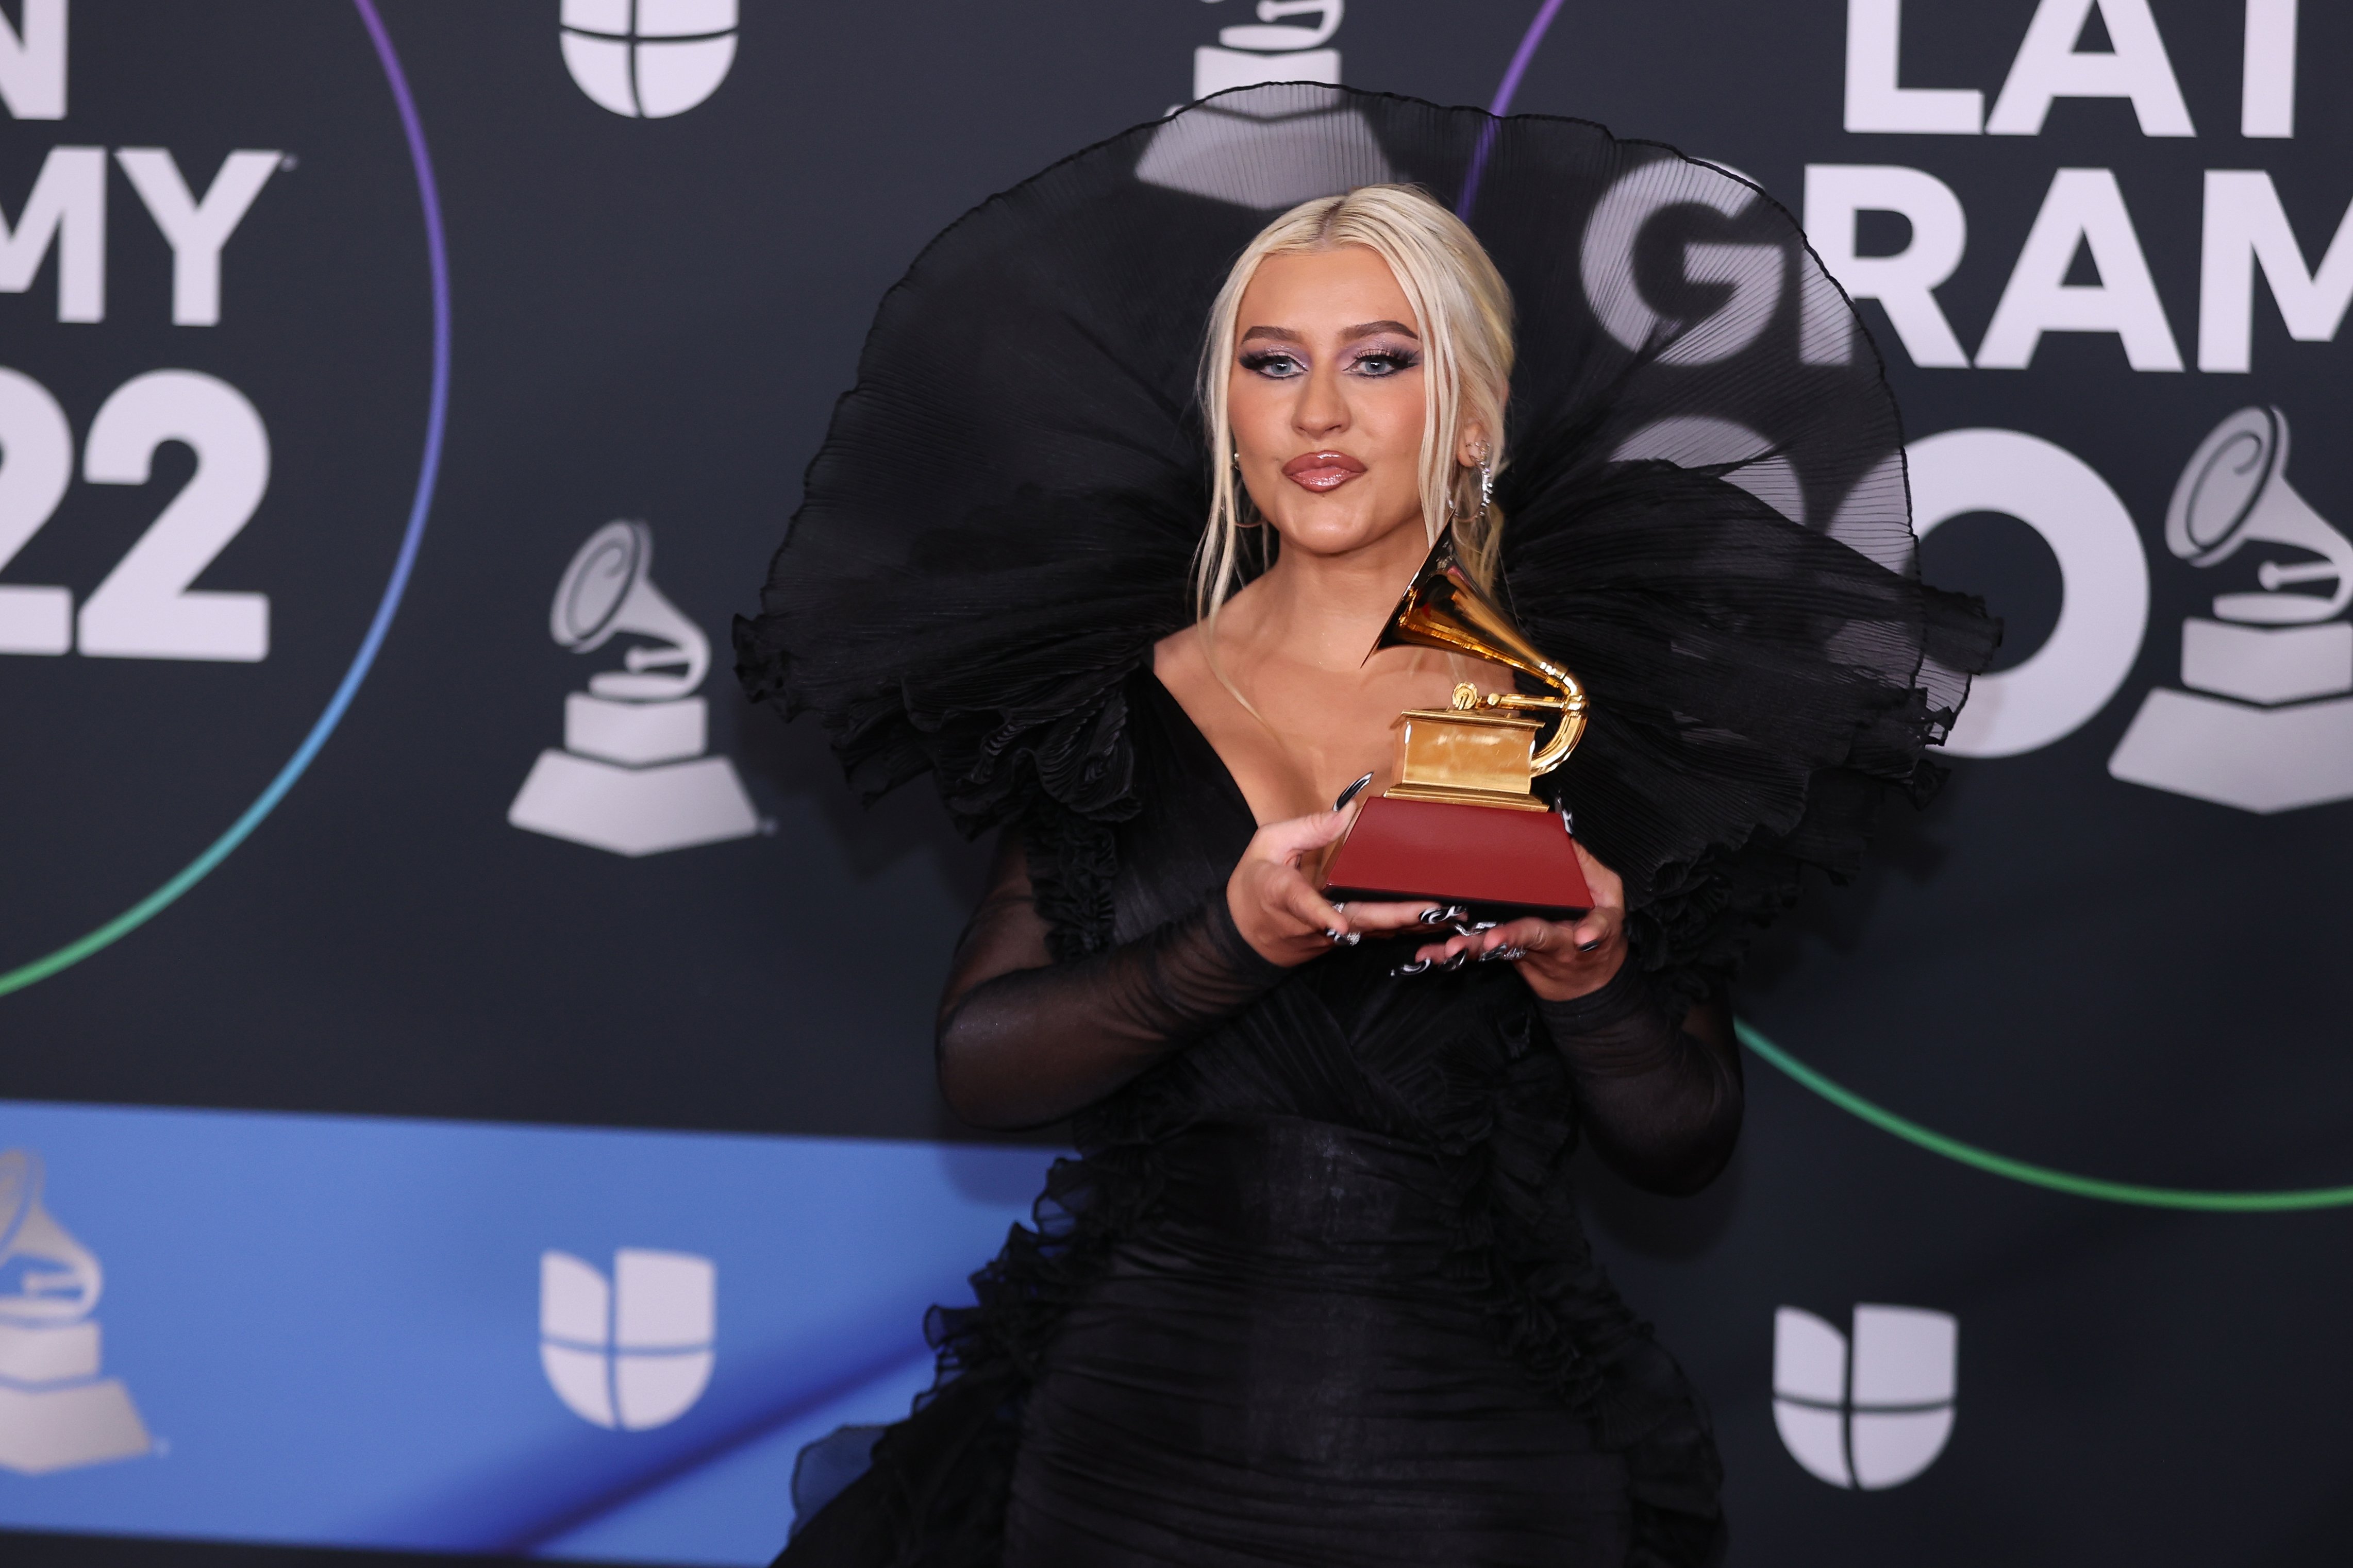 Christina Aguilera poses with the award for Best Traditional Pop Vocal Album in the media center for The 23rd Annual Latin Grammy Awards at the Mandalay Bay Events Center on November 17, 2022, in Las Vegas, Nevada | Source: GEtty Images